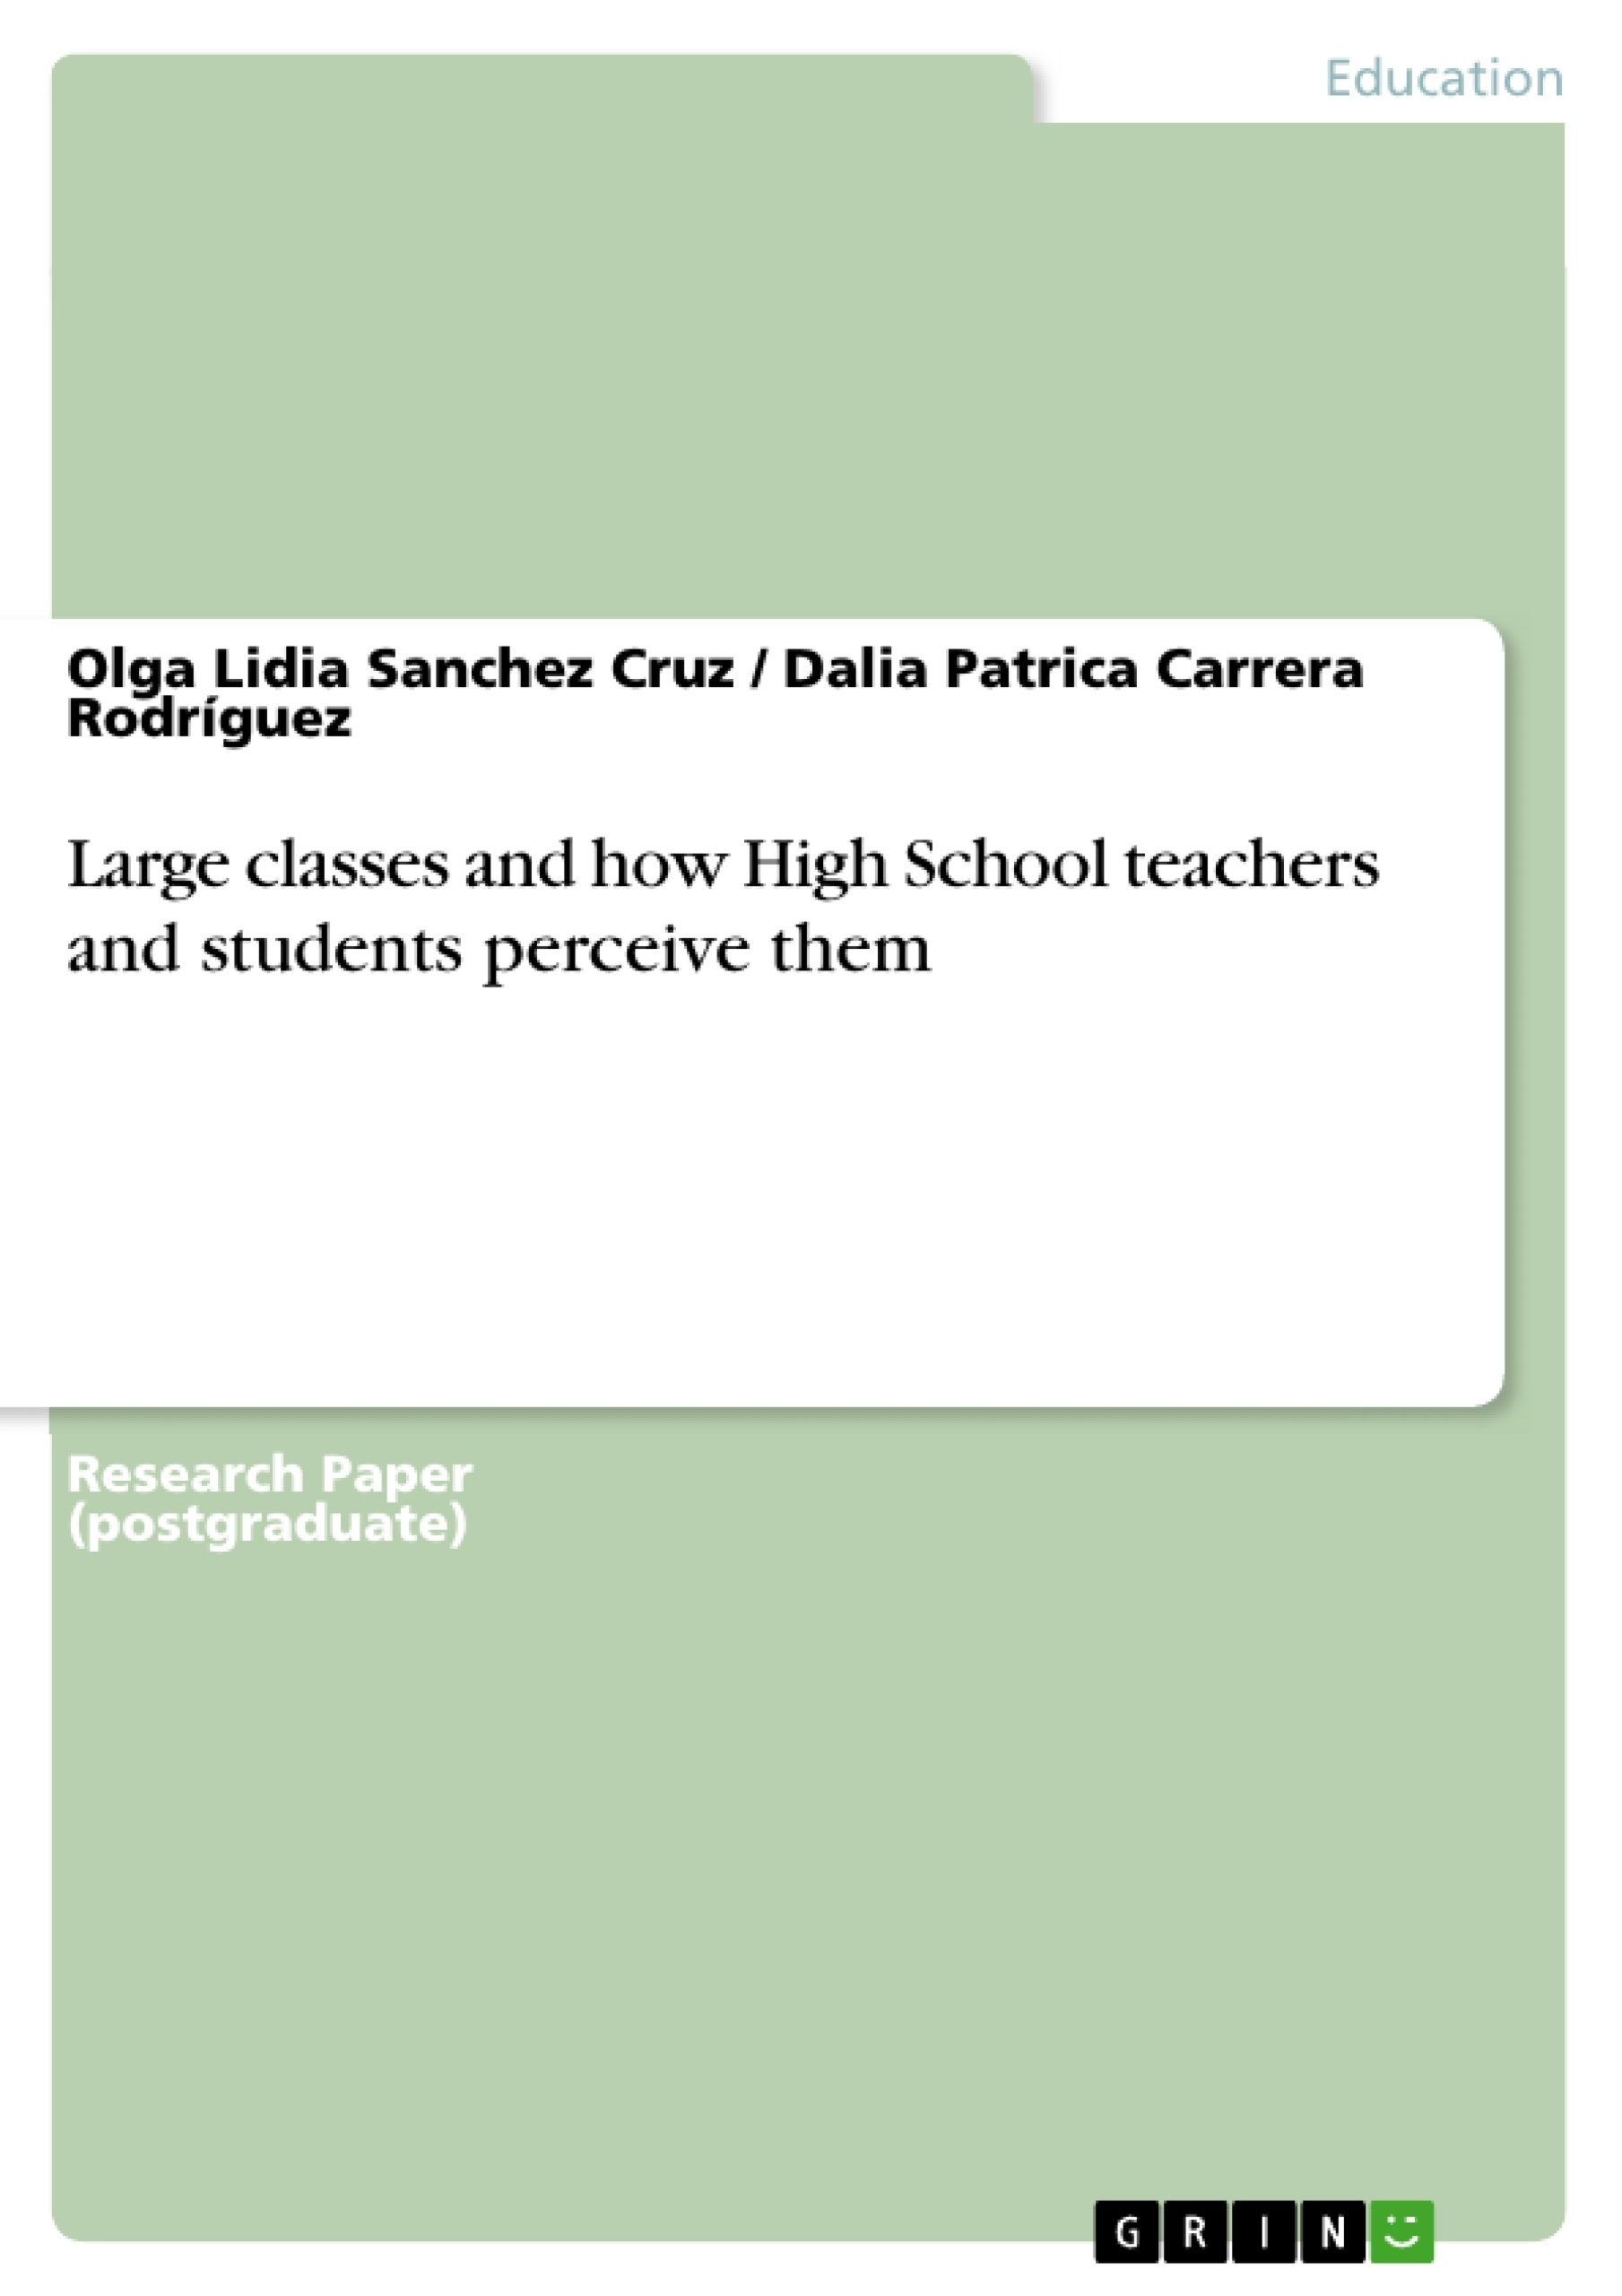 Title: Large classes and how High School teachers and students perceive them